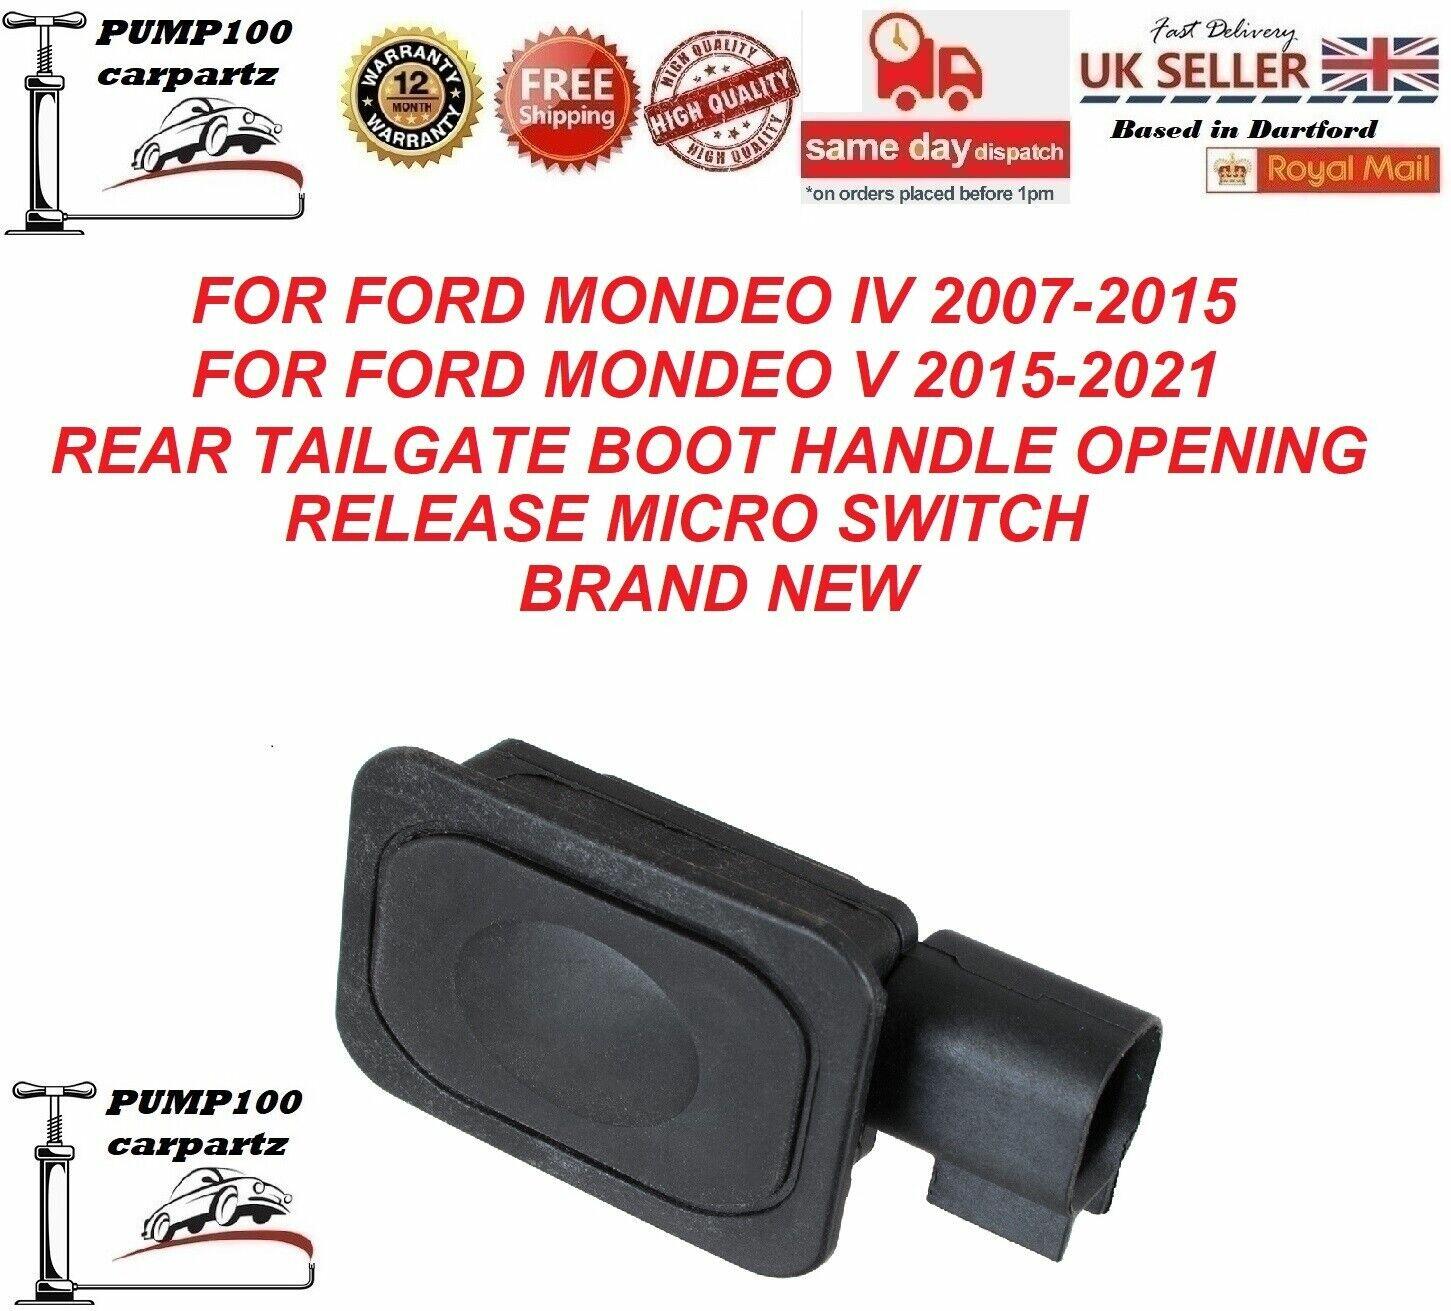 FOR FORD MONDEO 2007-2021 REAR TAILGATE BOOT OPENING HANDLE RELEASE MICRO  SWITCH